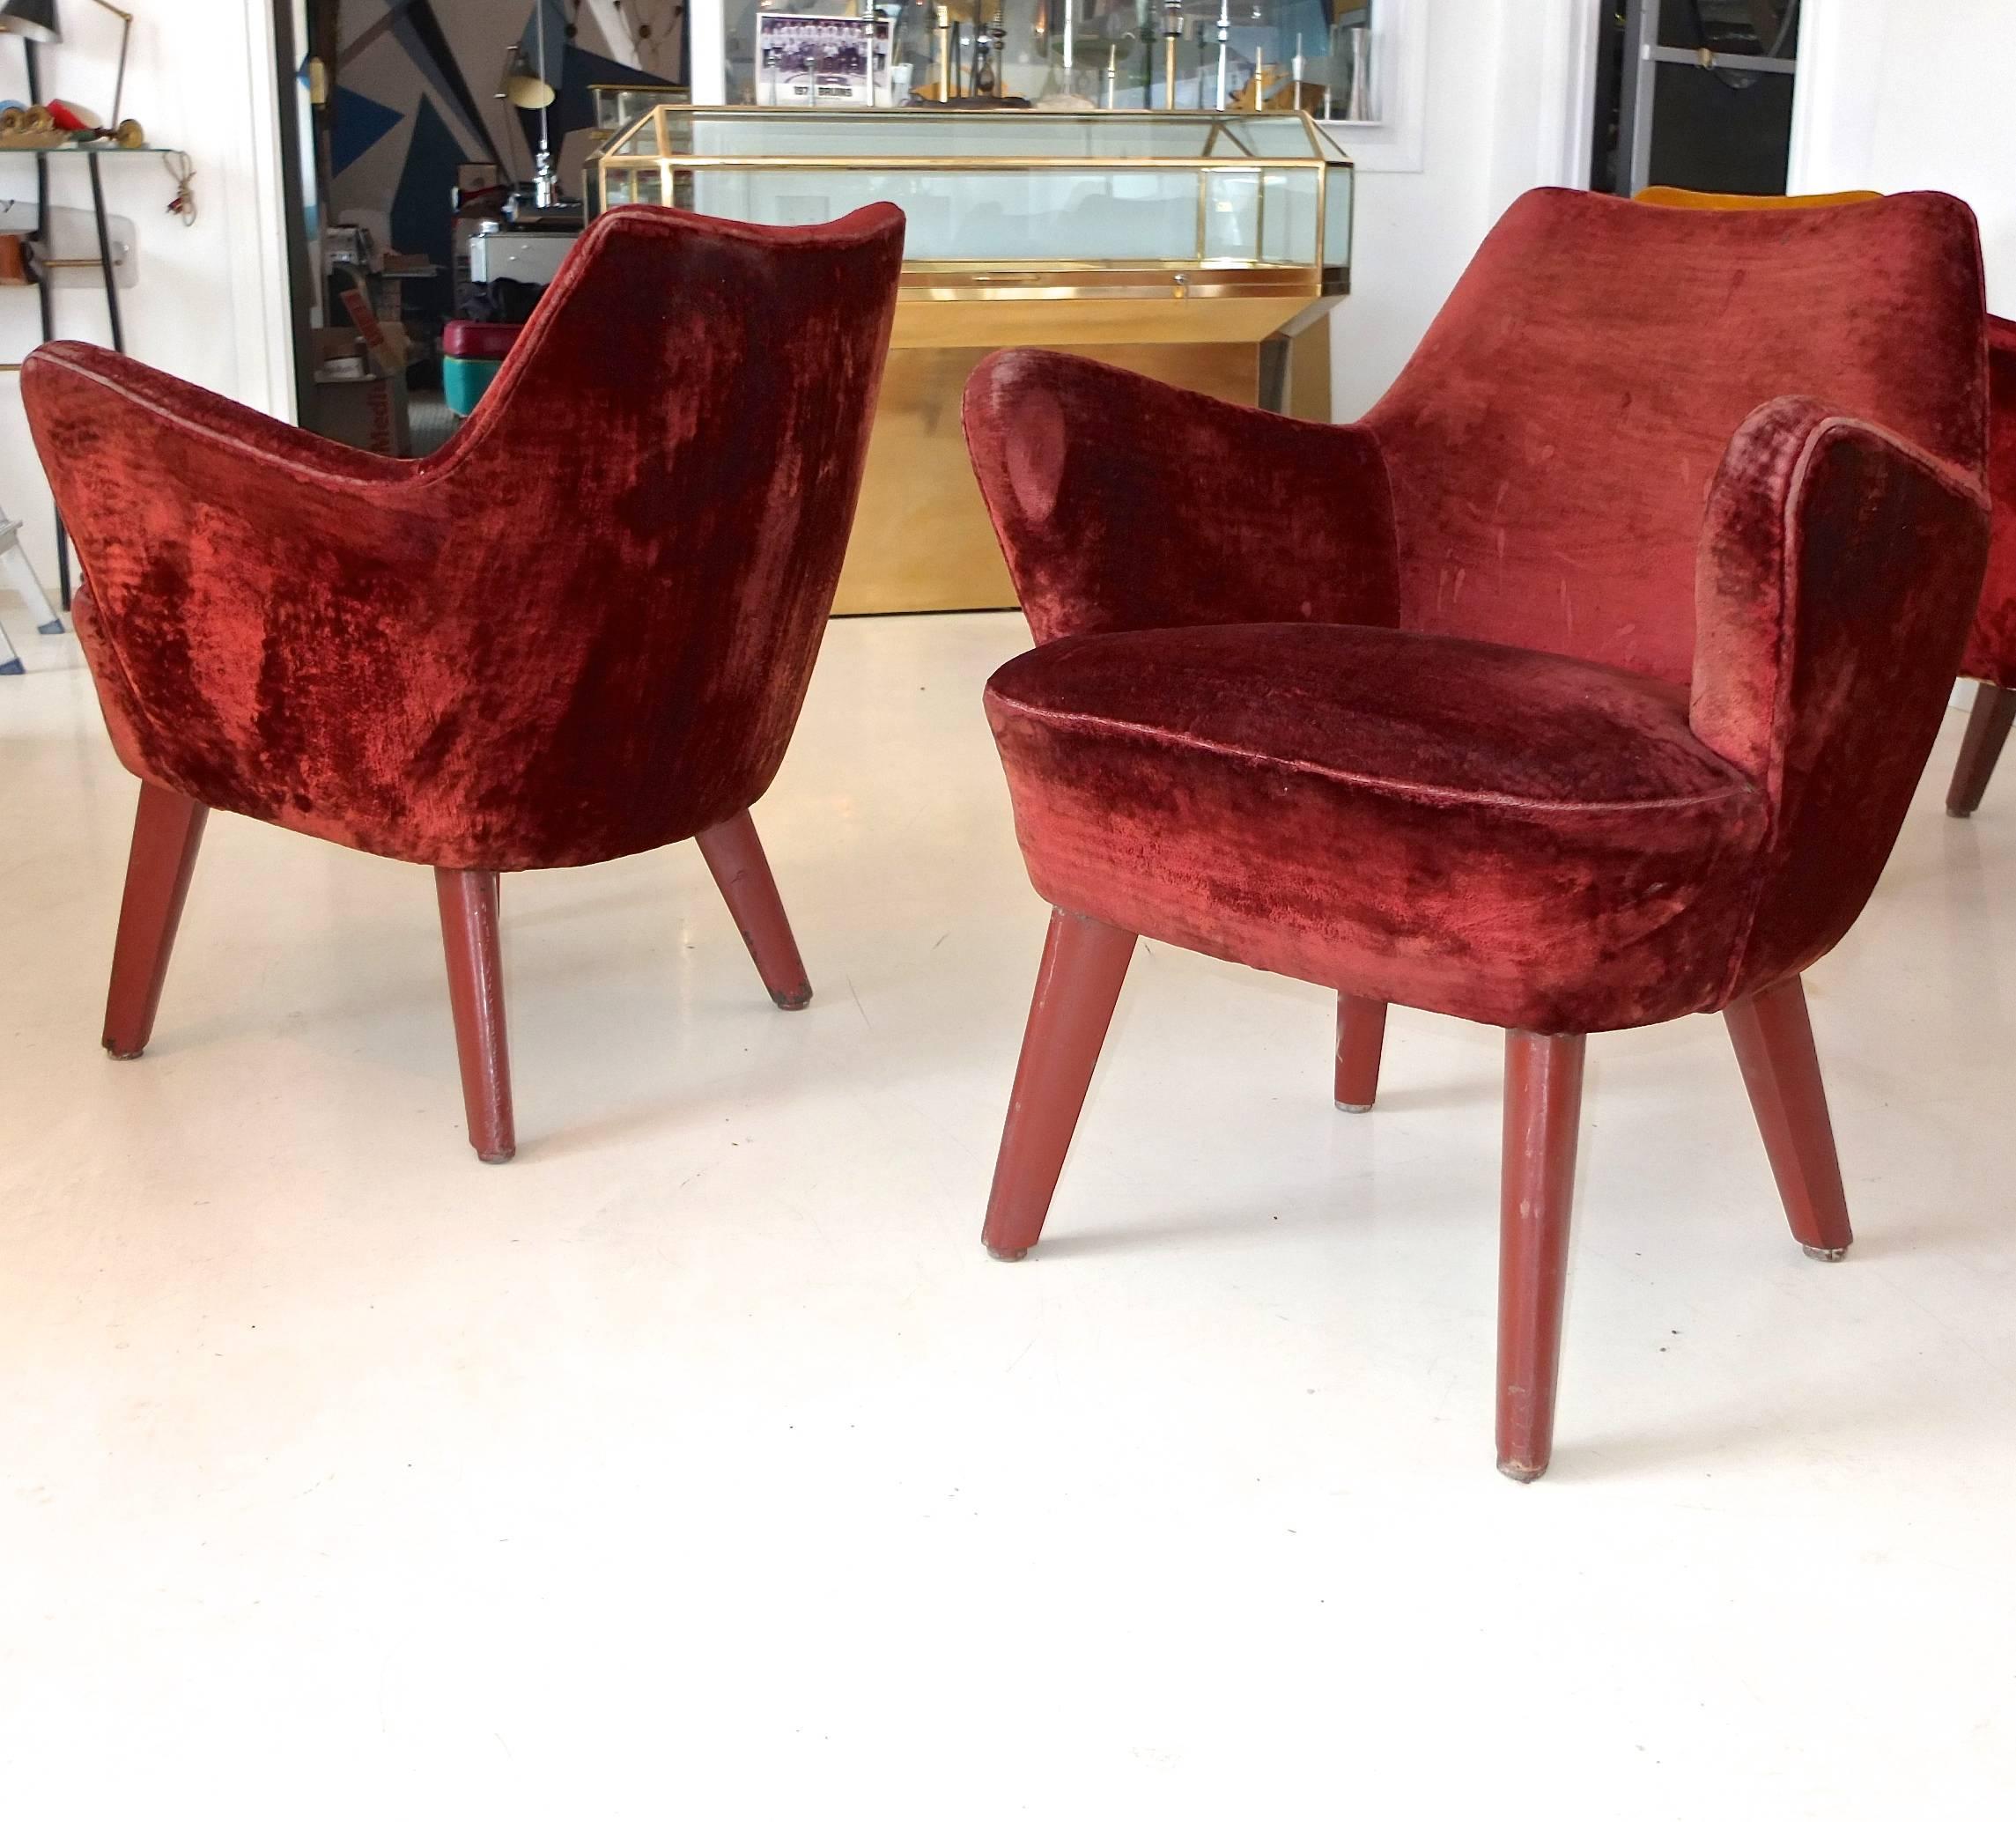 Mid-20th Century Gio Ponti Chairs from Augustus Ocean Liner First Class Bar